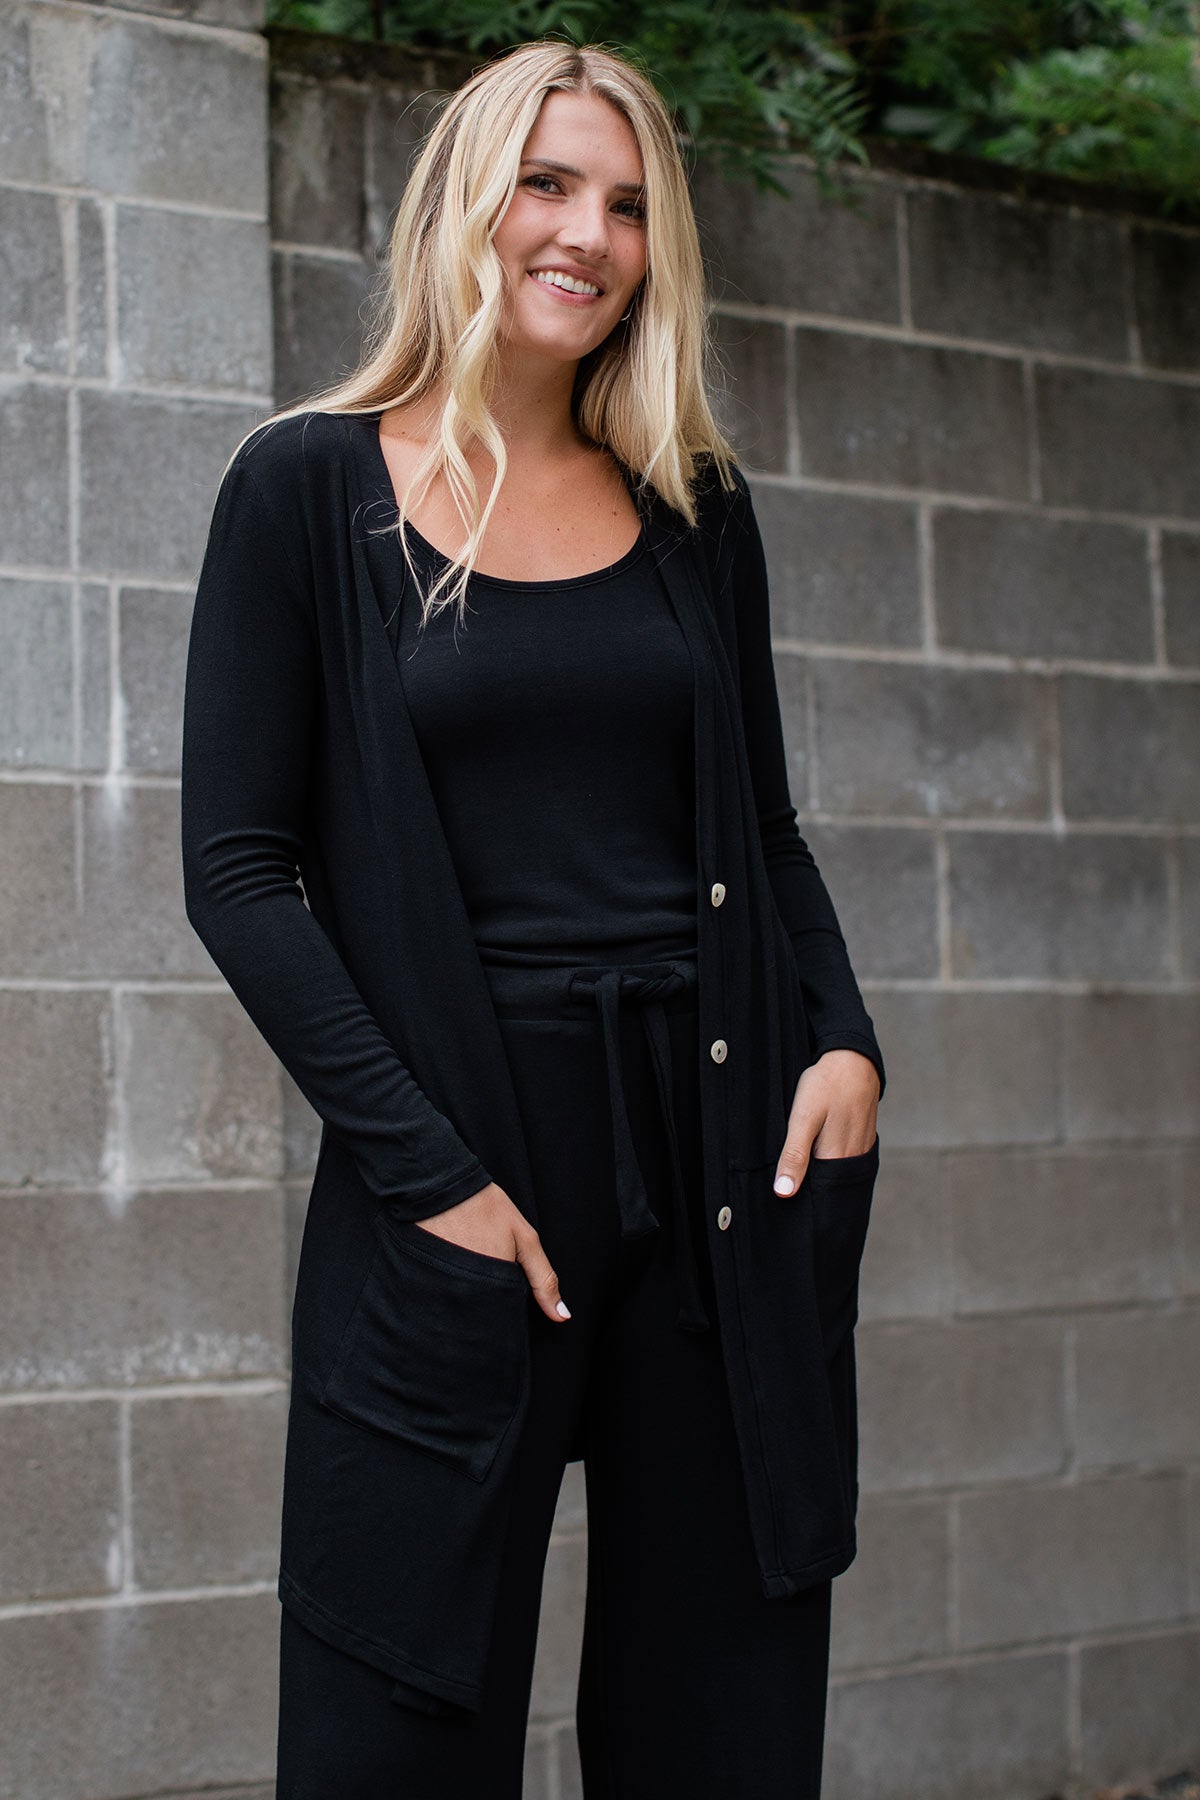 A woman standing and smiling with both hands in her pants pockets, wearing Yala Leslie Long Sleeve Oversize Bamboo Cardigan in Black